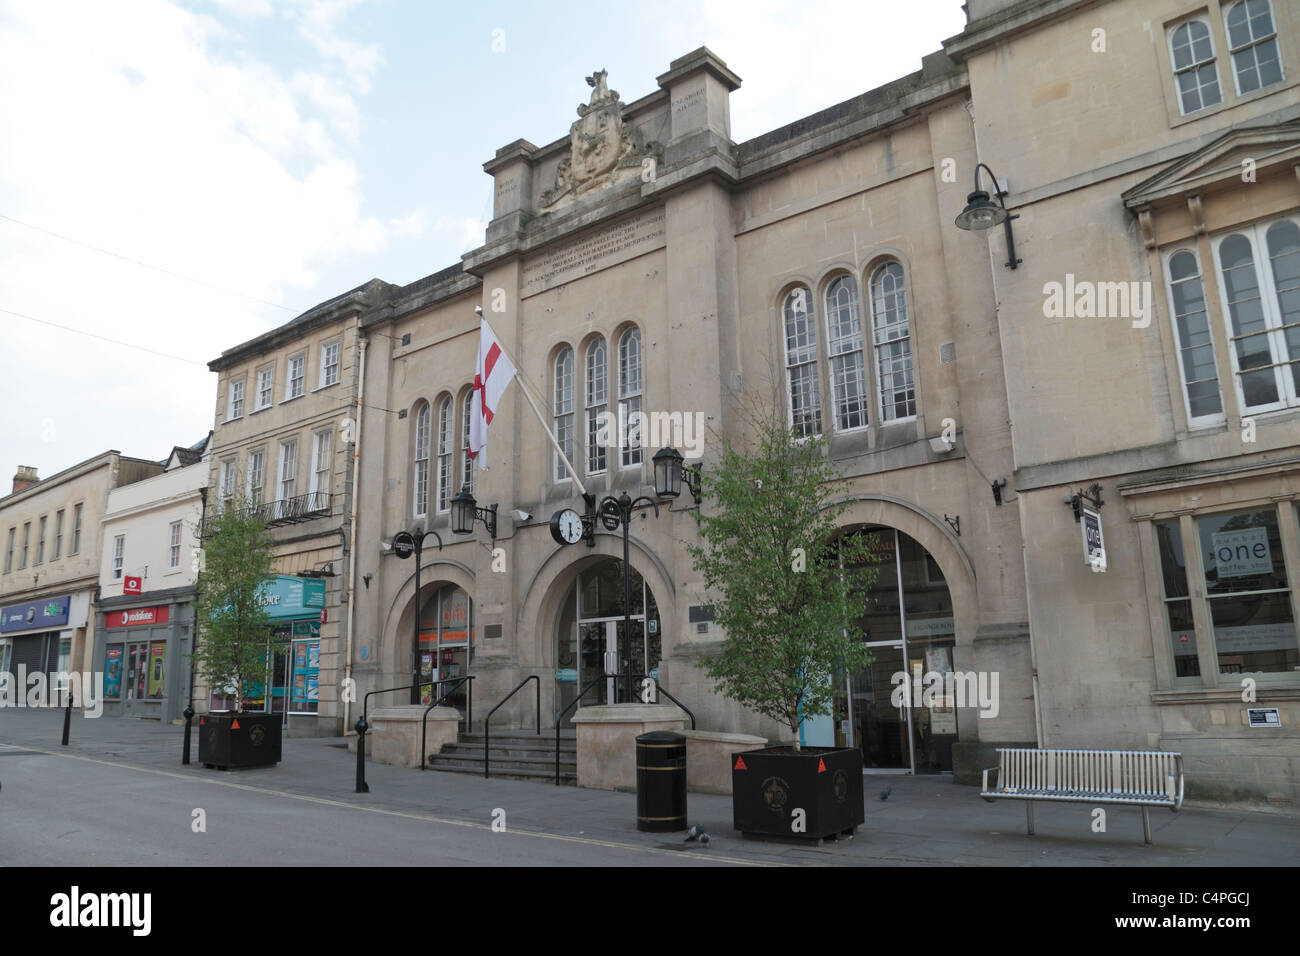 The Town Hall, built in 1834, on the High Street in Chippenham, Wiltshire, UK. Stock Photo